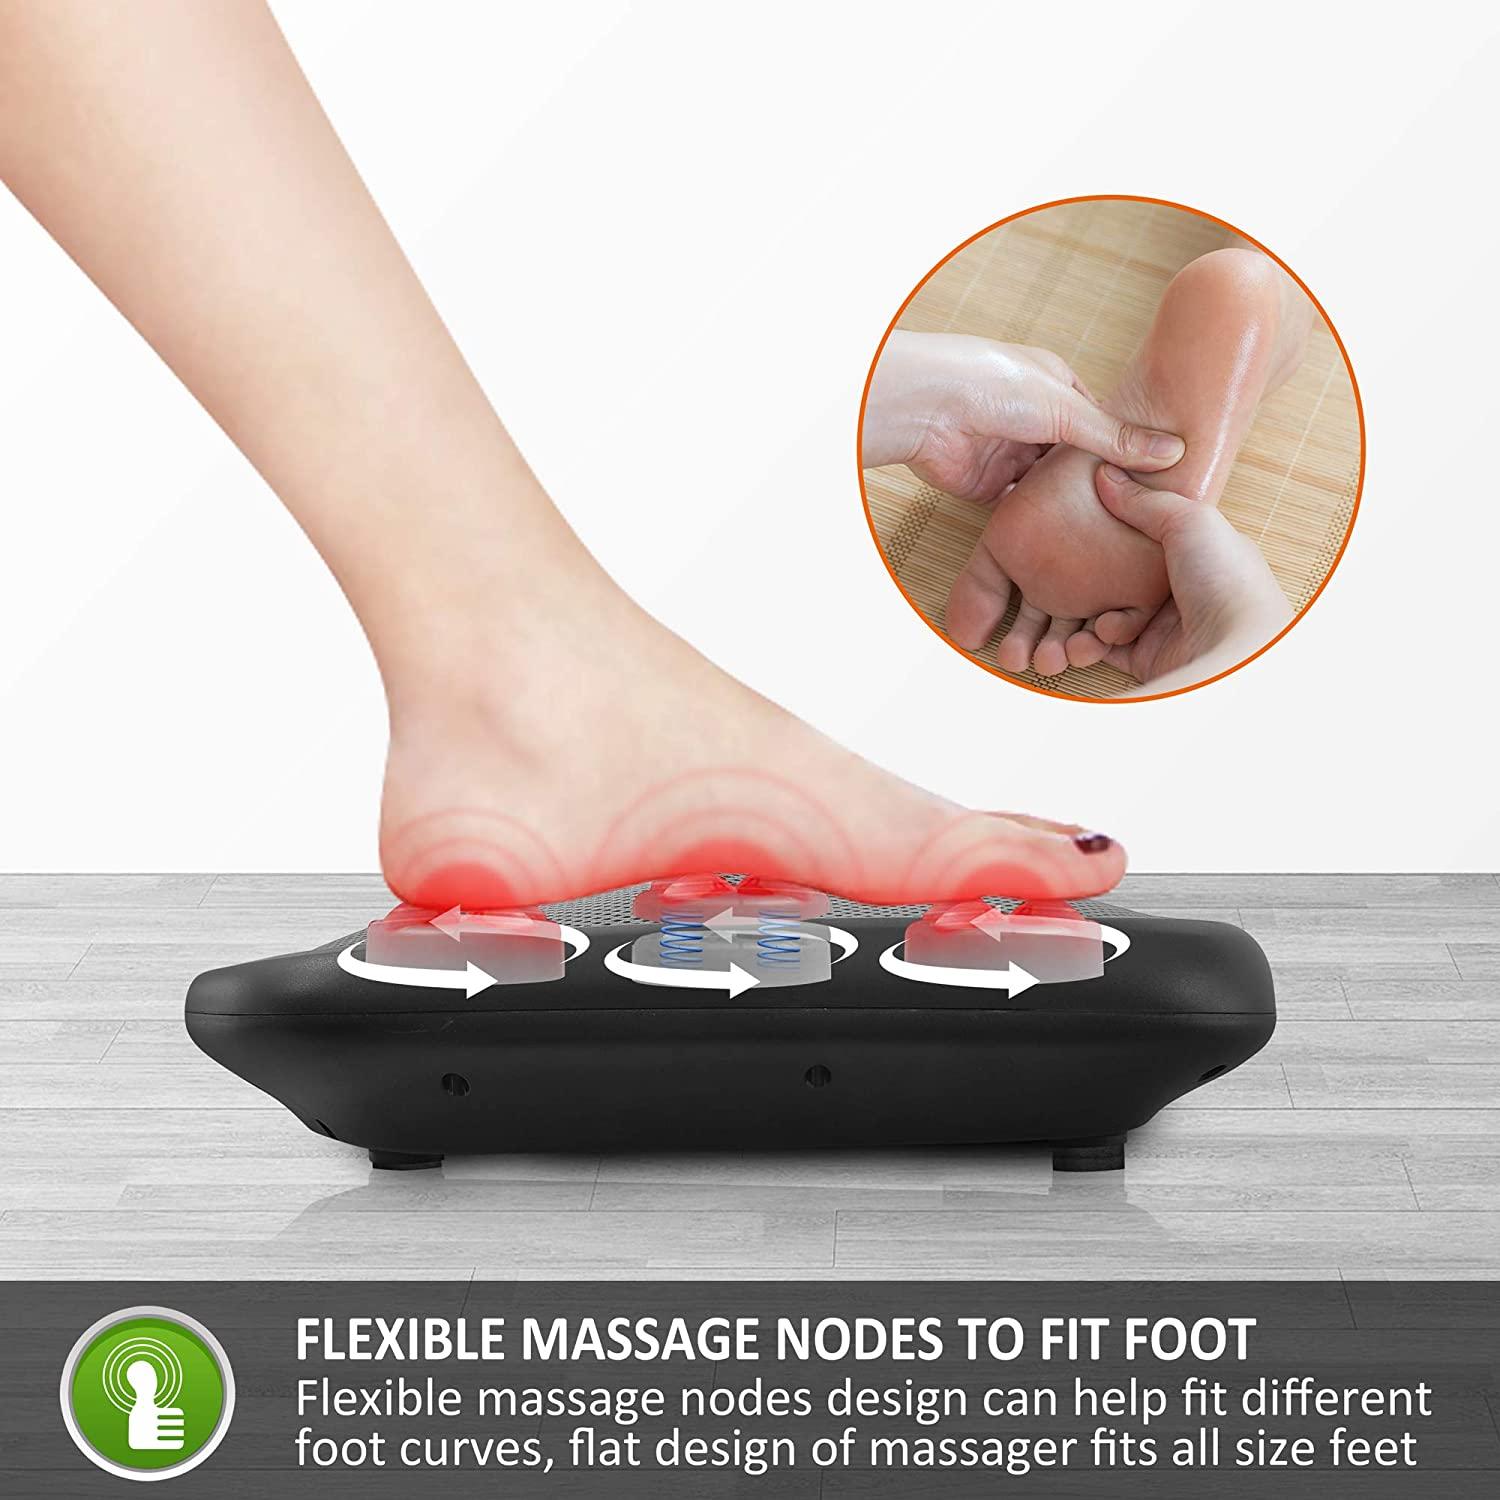  Nekteck Foot Massager with Heat, Shiatsu Heated Electric  Kneading Foot Massager Machine for Plantar Fasciitis, Built-in Infrared  Heat Function and Power Cord (Black) : Health & Household